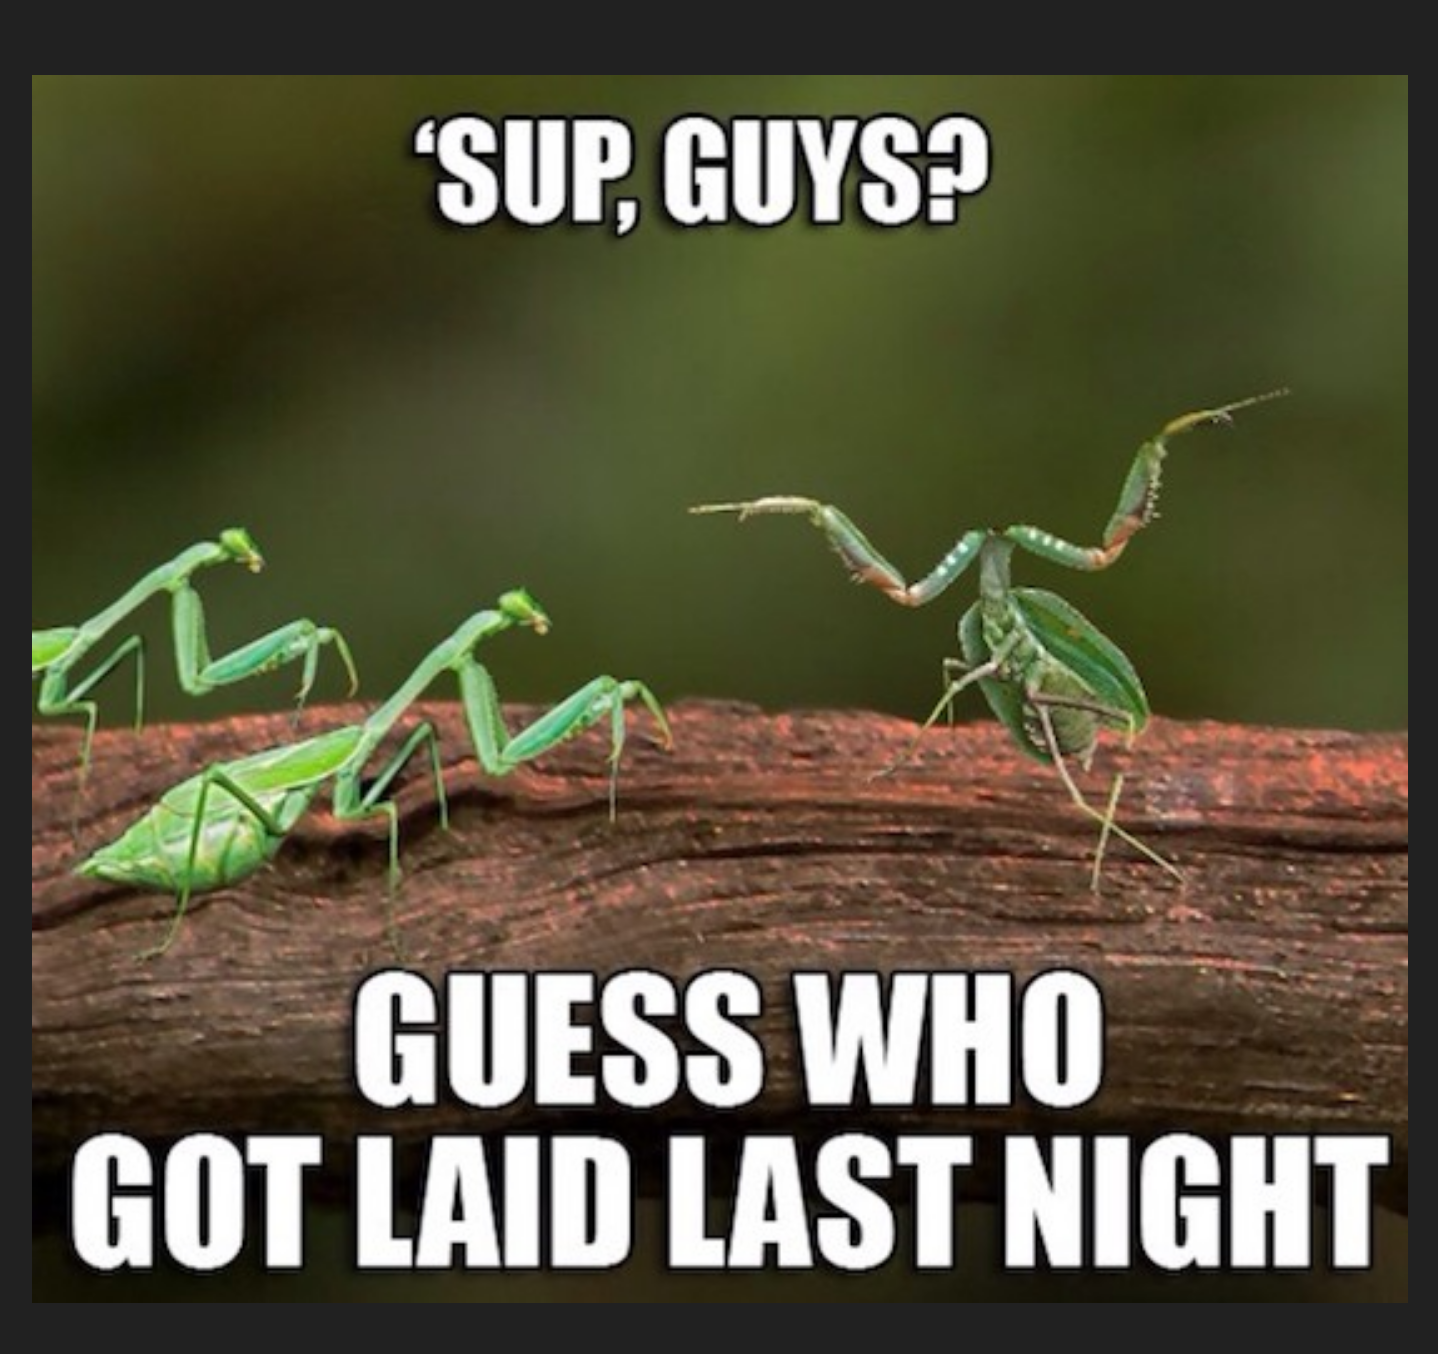 Funny meme of grasshopper with no head bragging to his friends he got laid last night.